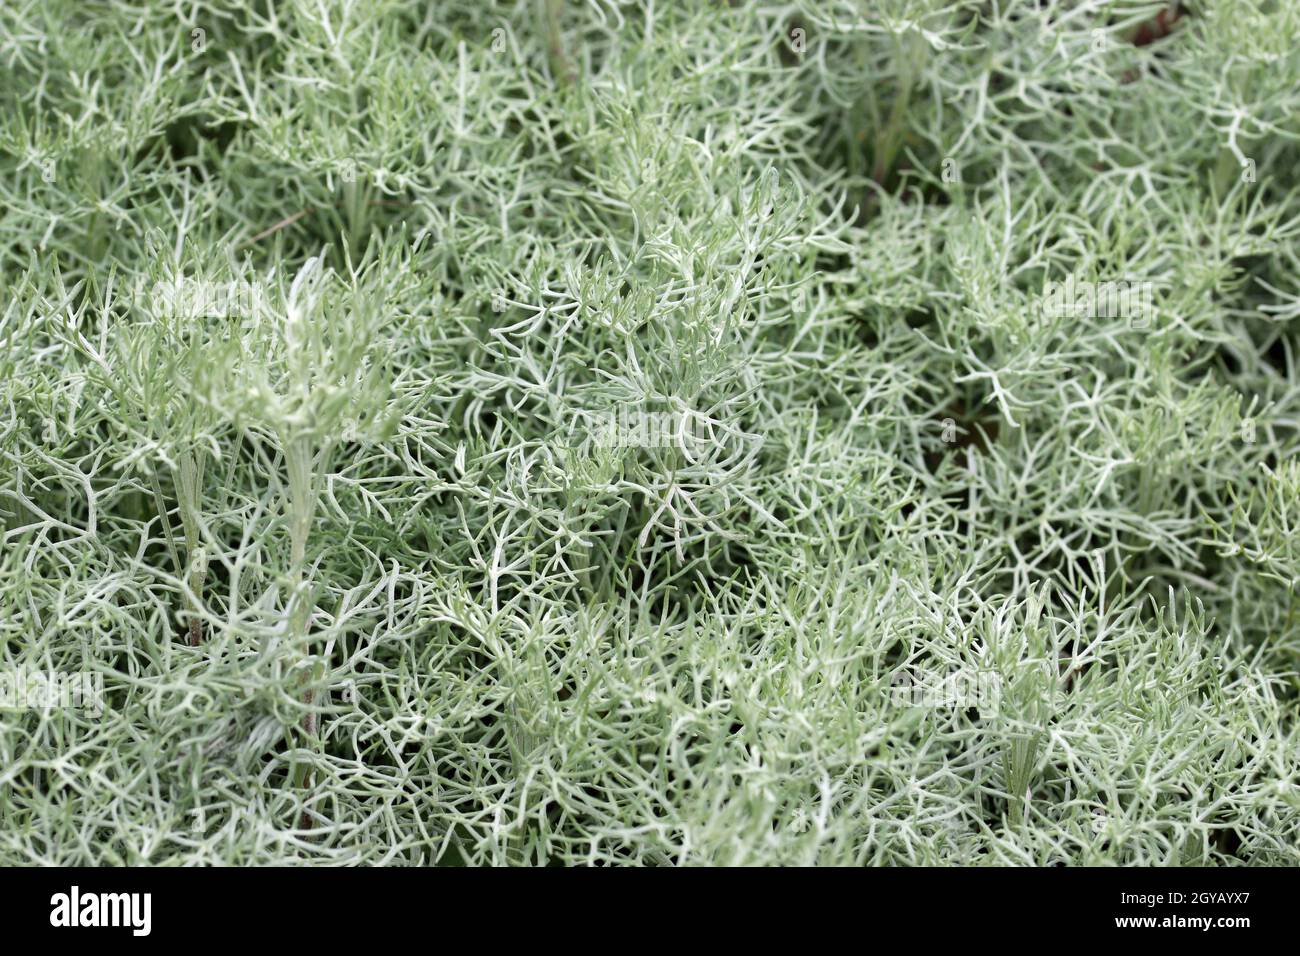 Arctic sage, also known as prairie sagewort, Artemisia frigida, leaves with no flowers and a background of leaves blurred around the edges. Stock Photo